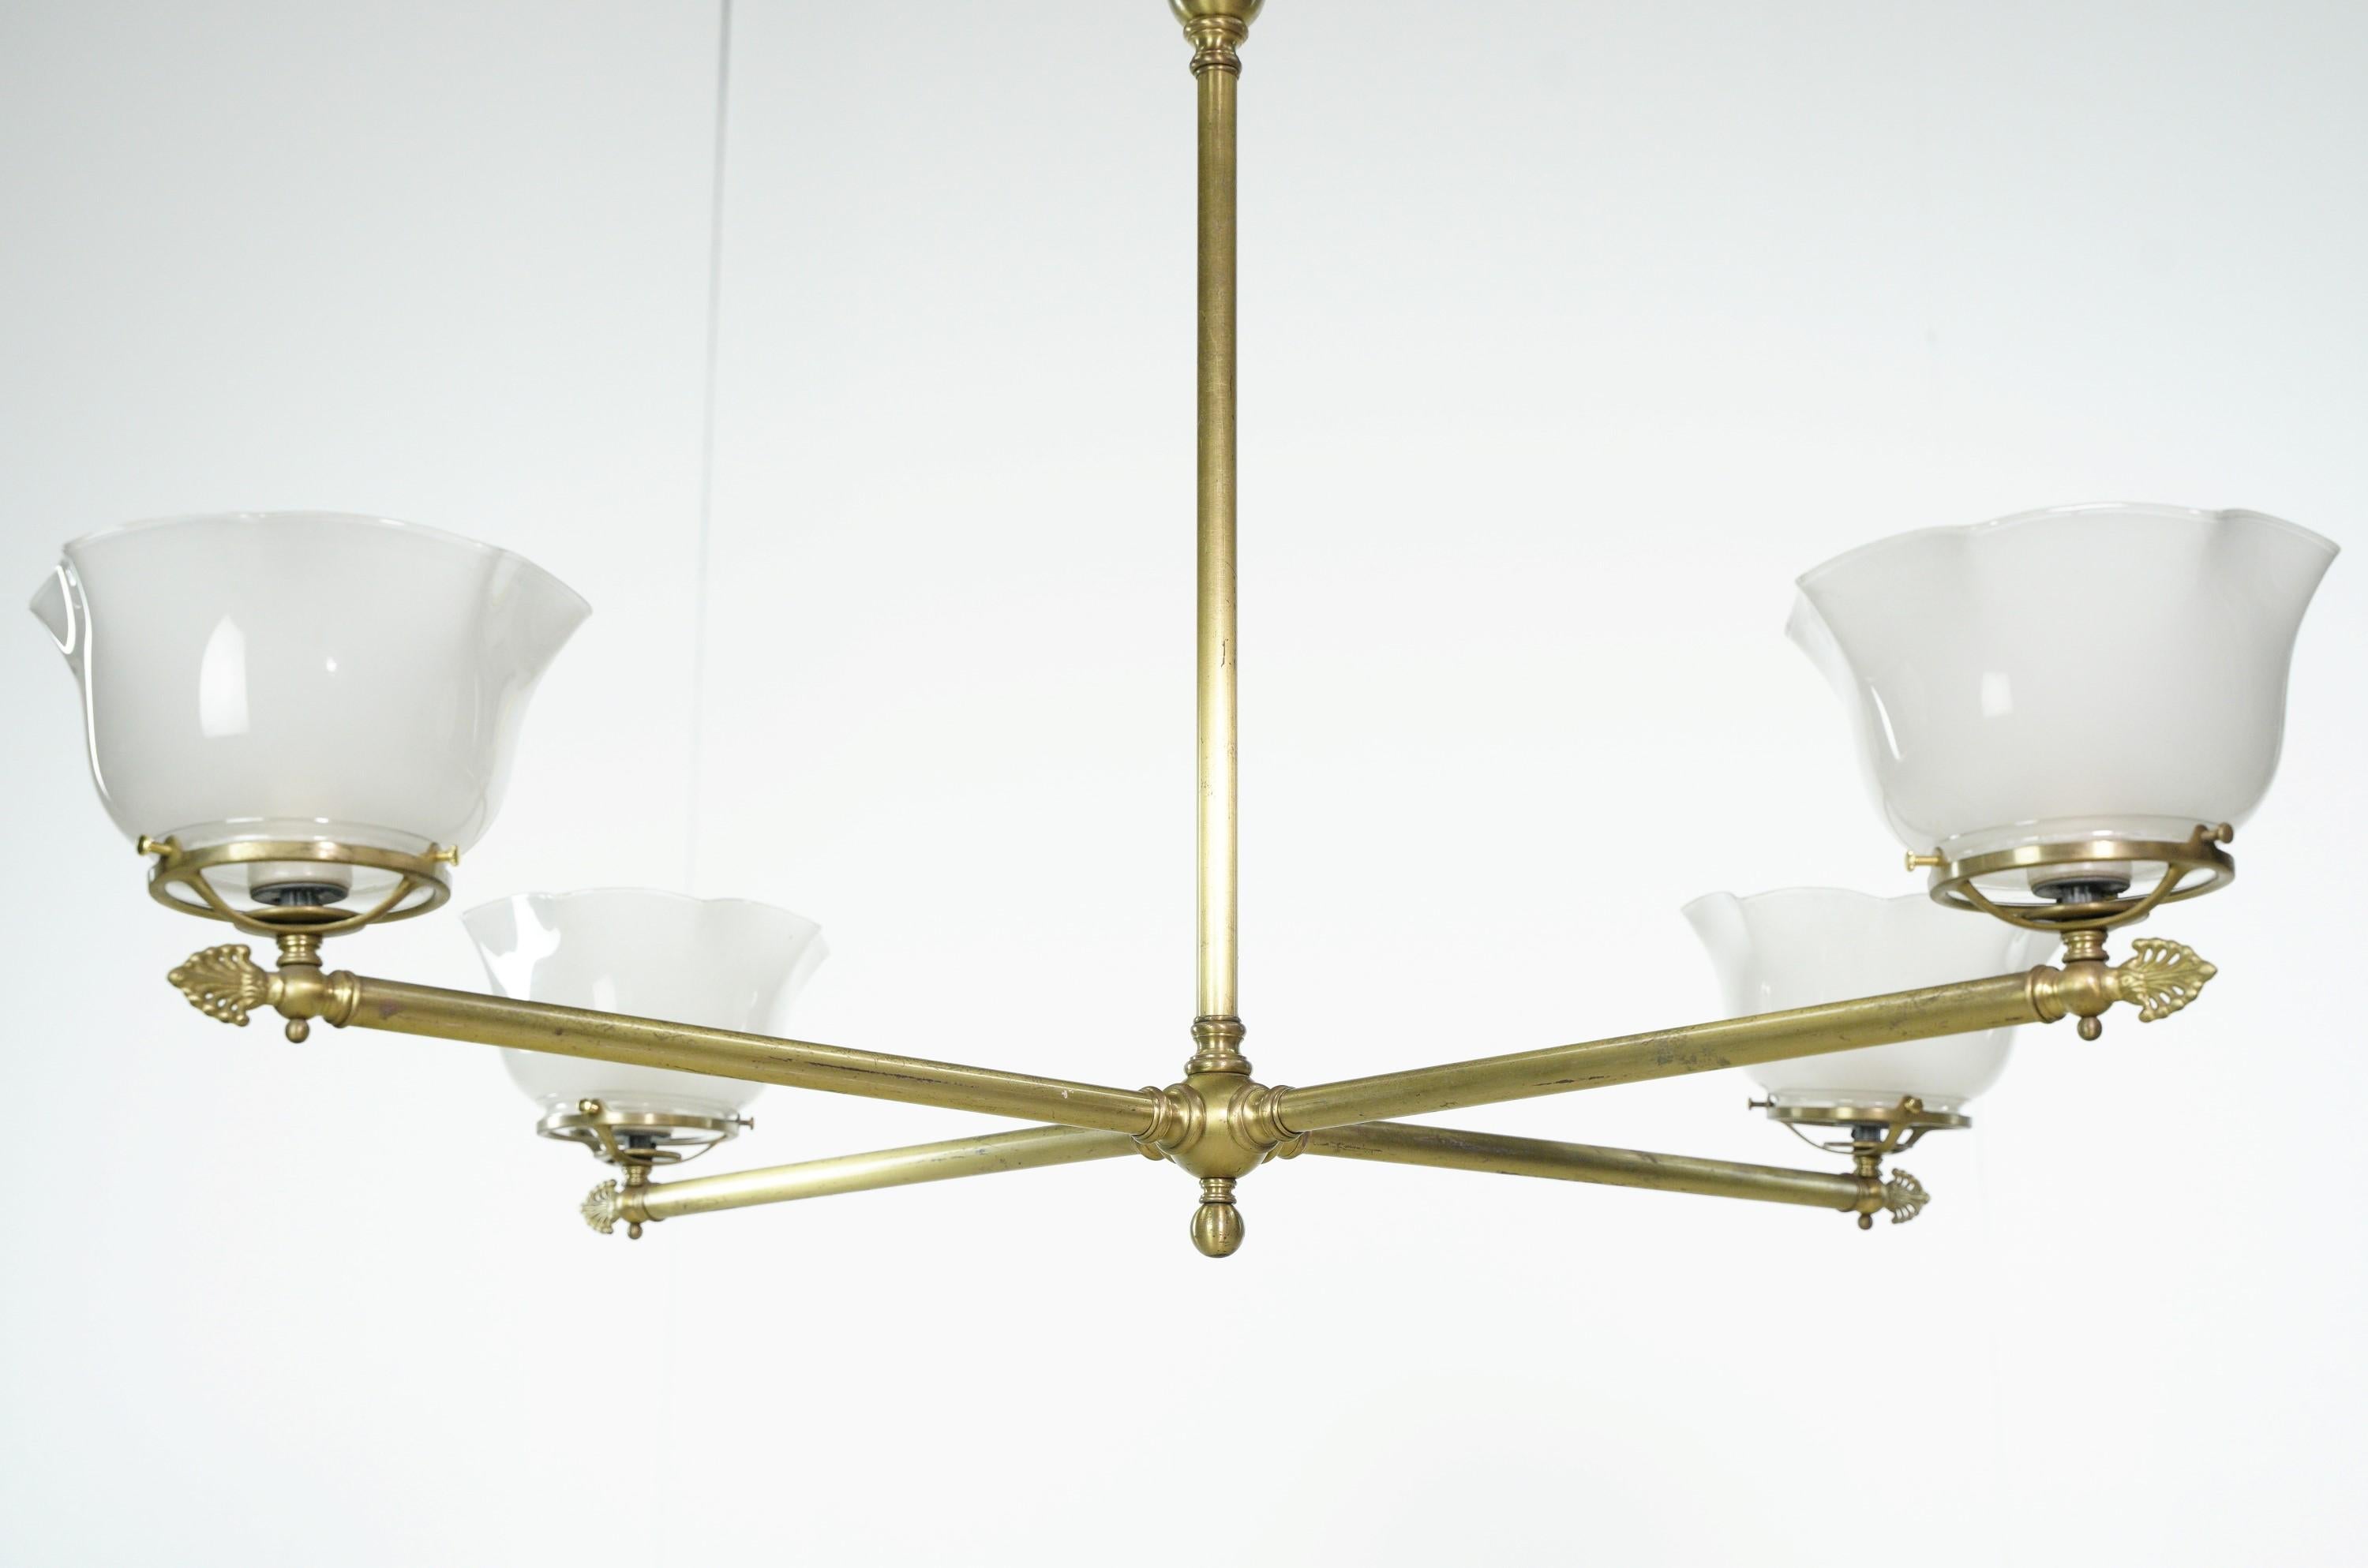 Modern 4 Arm Ruffled Glass Shades Brass Chandelier In Good Condition For Sale In New York, NY